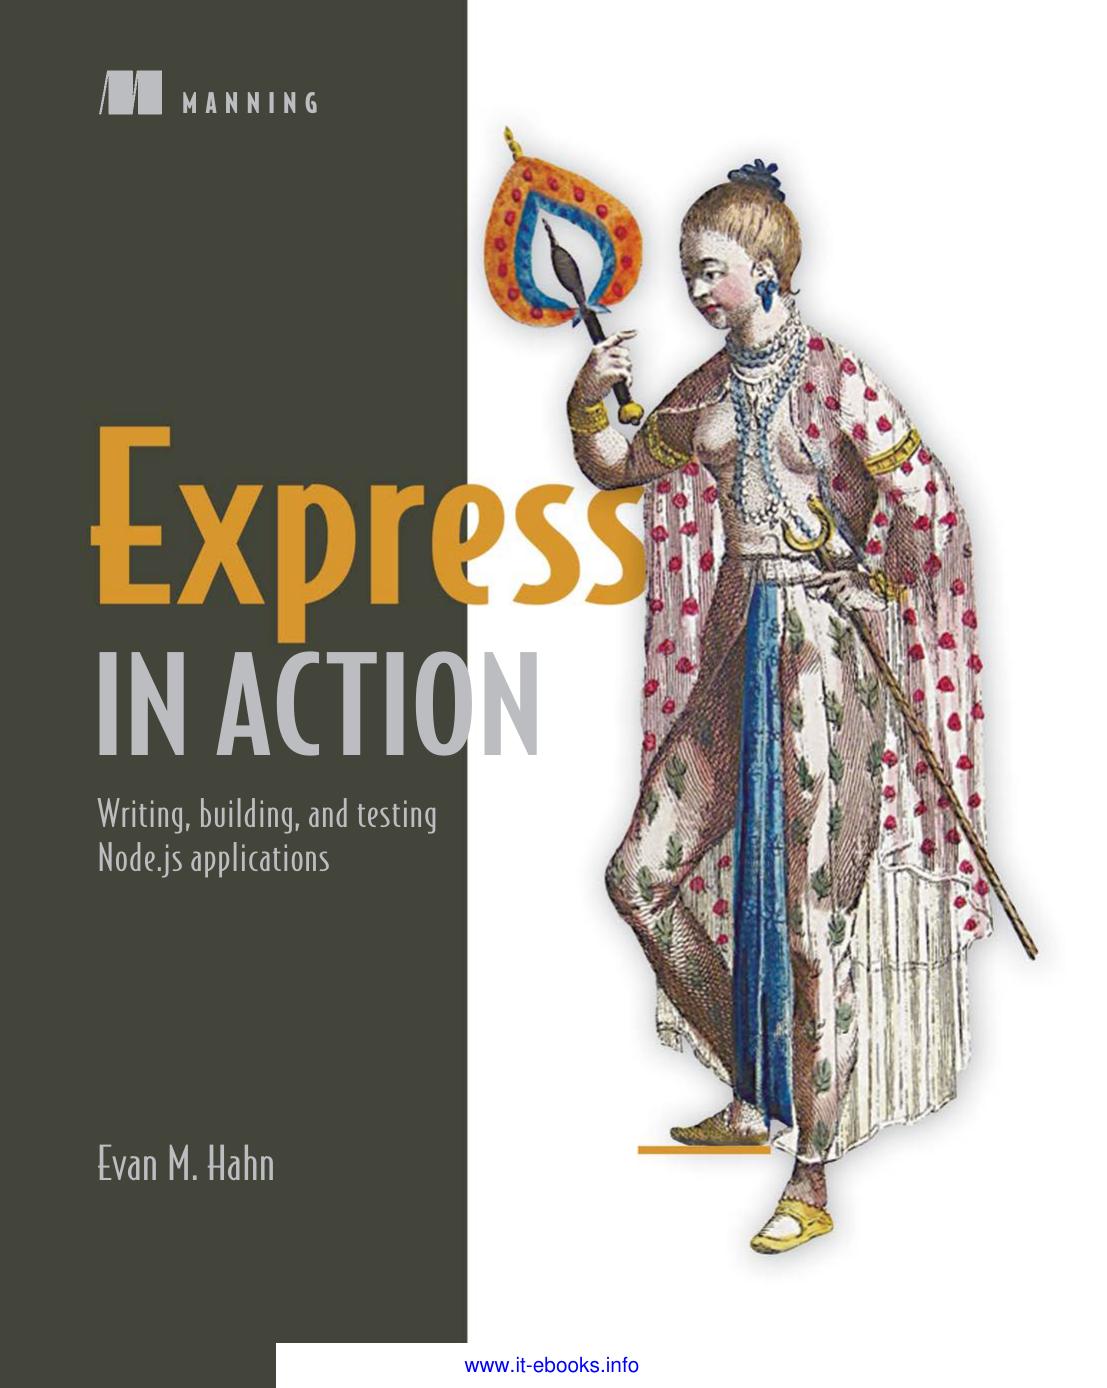 Express.js in Action